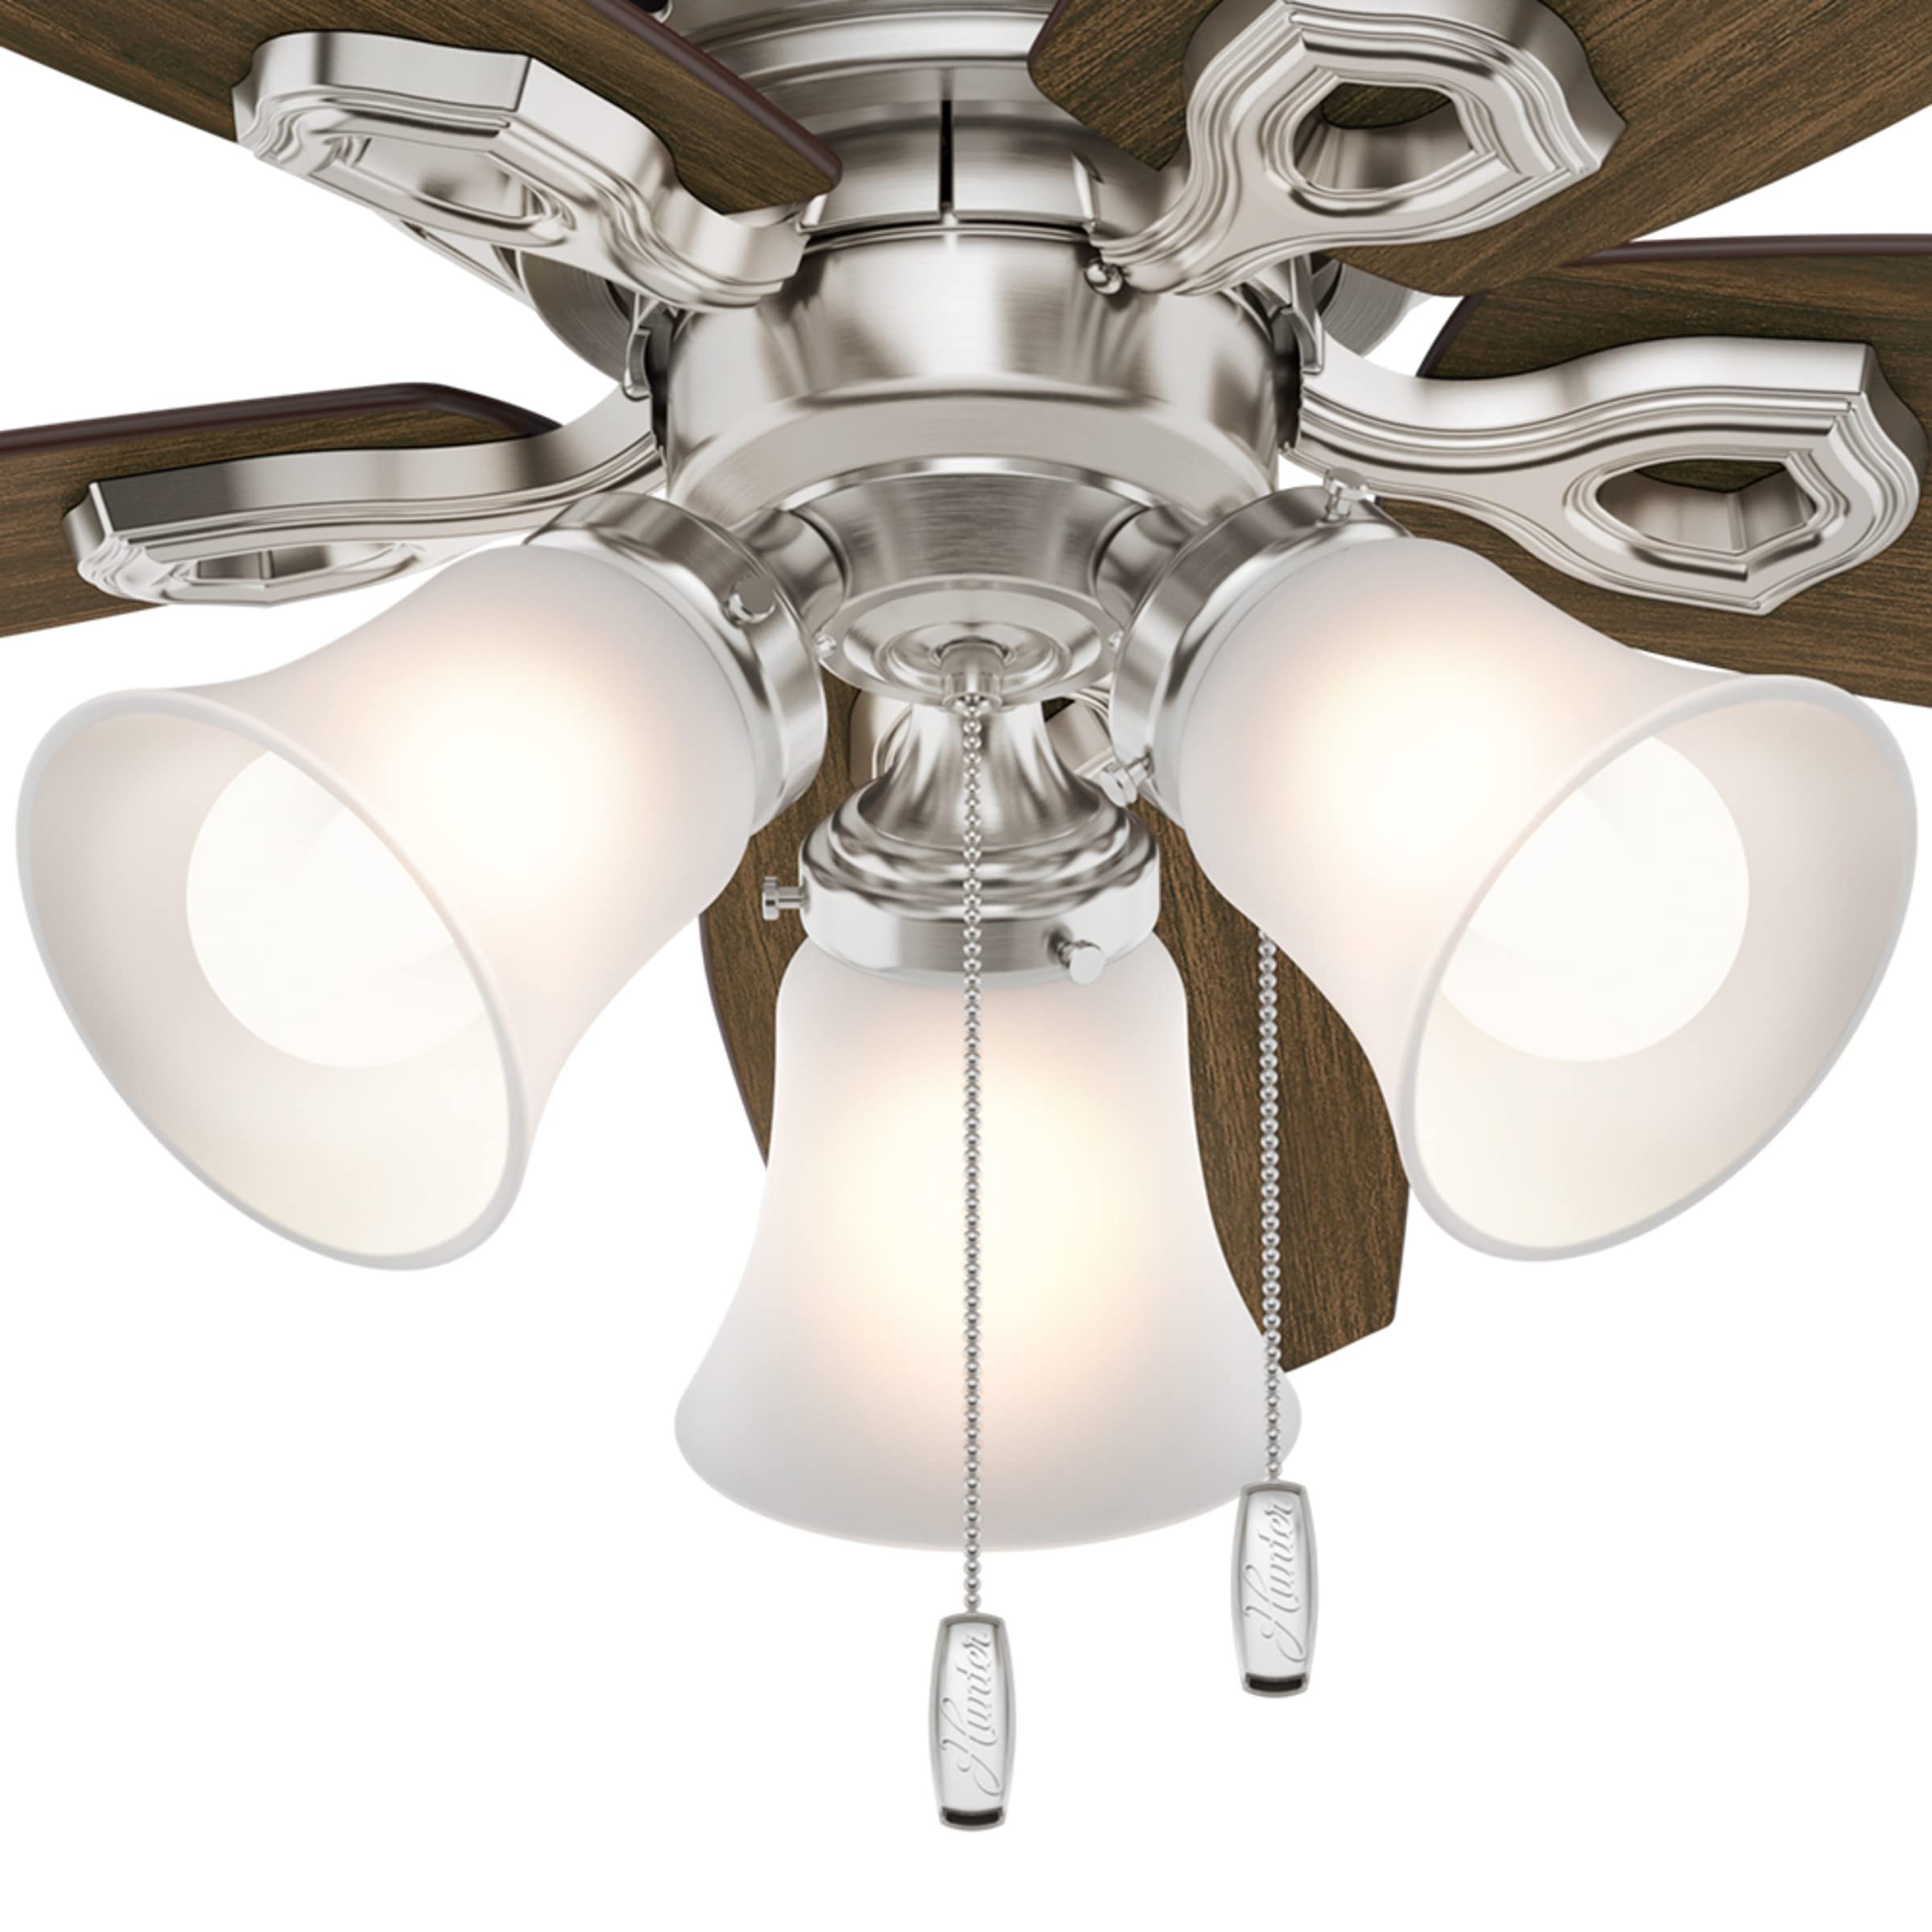 Hunter Fan Company, 51092, 42 inch Builder Brushed Nickel Low Profile Ceiling Fan with LED Light Kit and Pull Chain